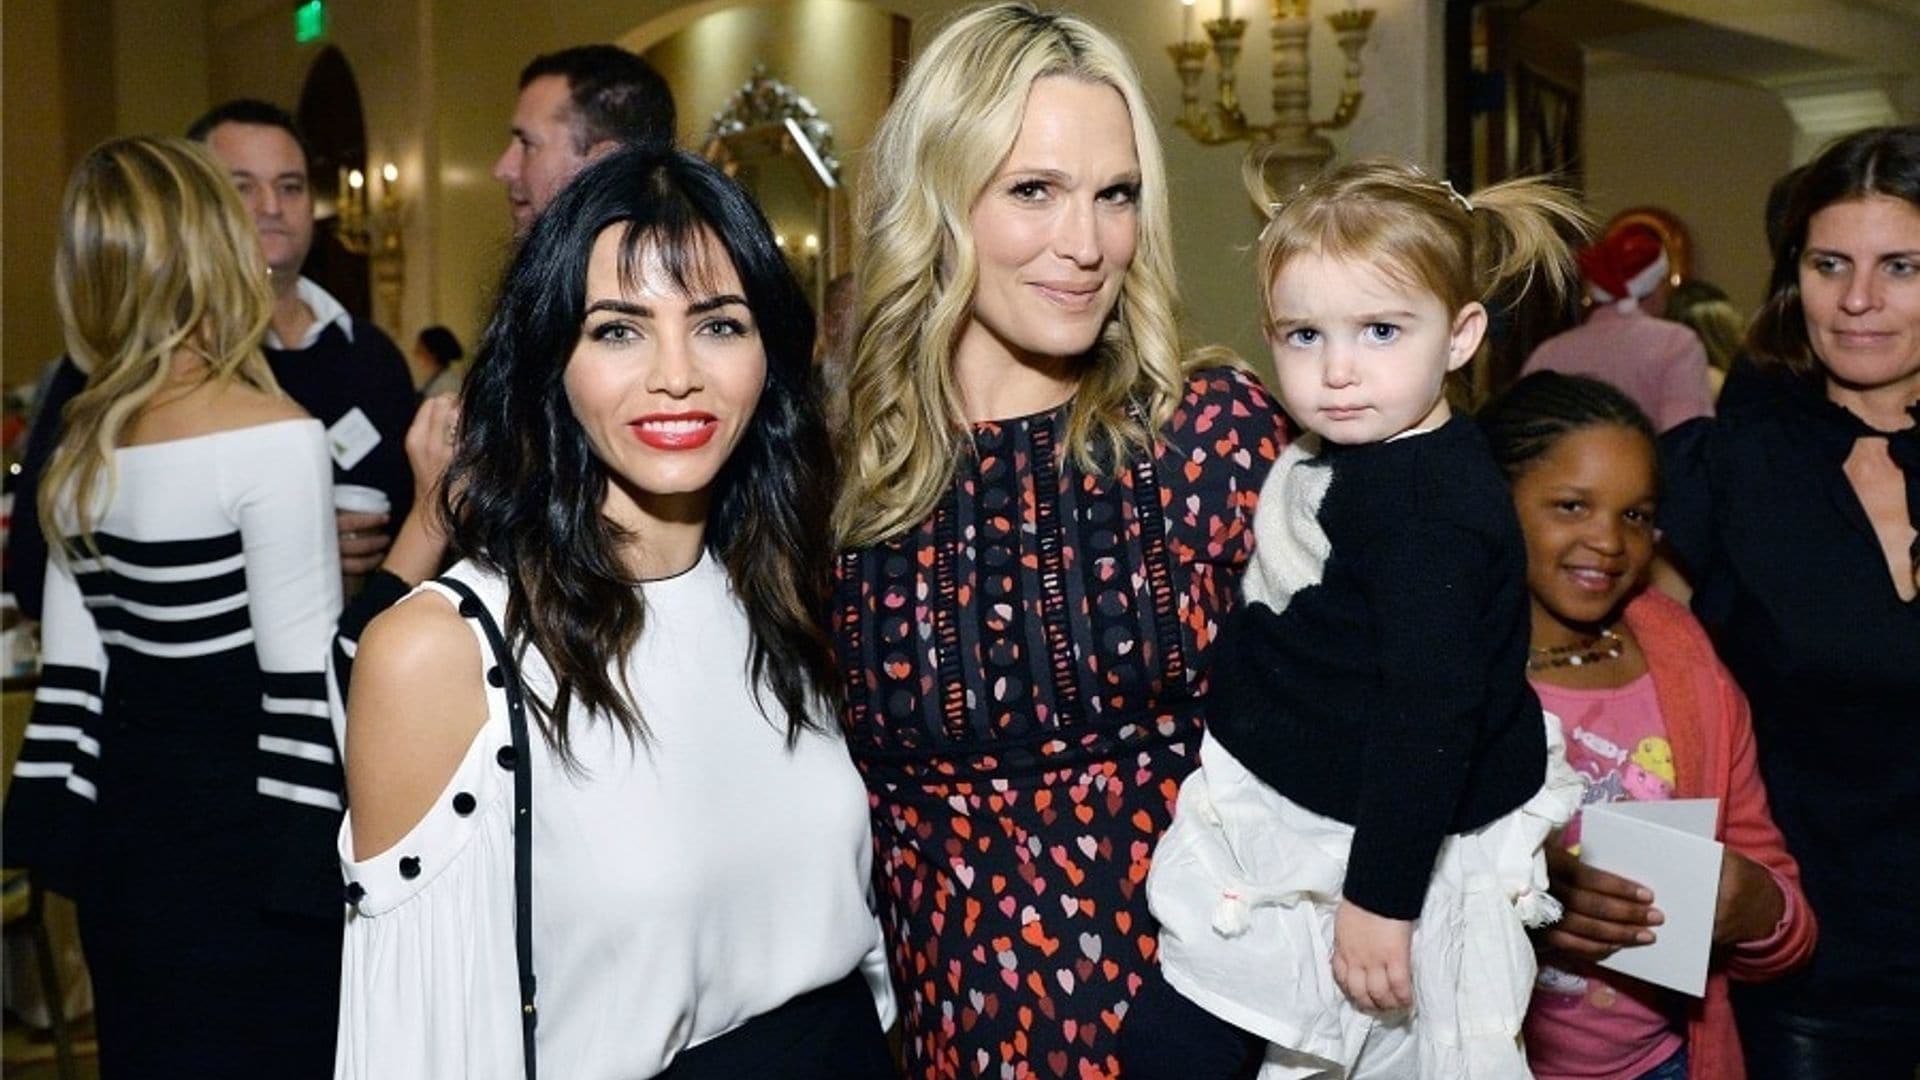 December 18: Jenna Dewan Tatum and Molly Sims were moms on a holiday mission during the Baby2Baby holiday party presented by Old Navy at Montage in Beverly Hills.
Photo: Stefanie Keenan/Getty Images for Baby2Baby